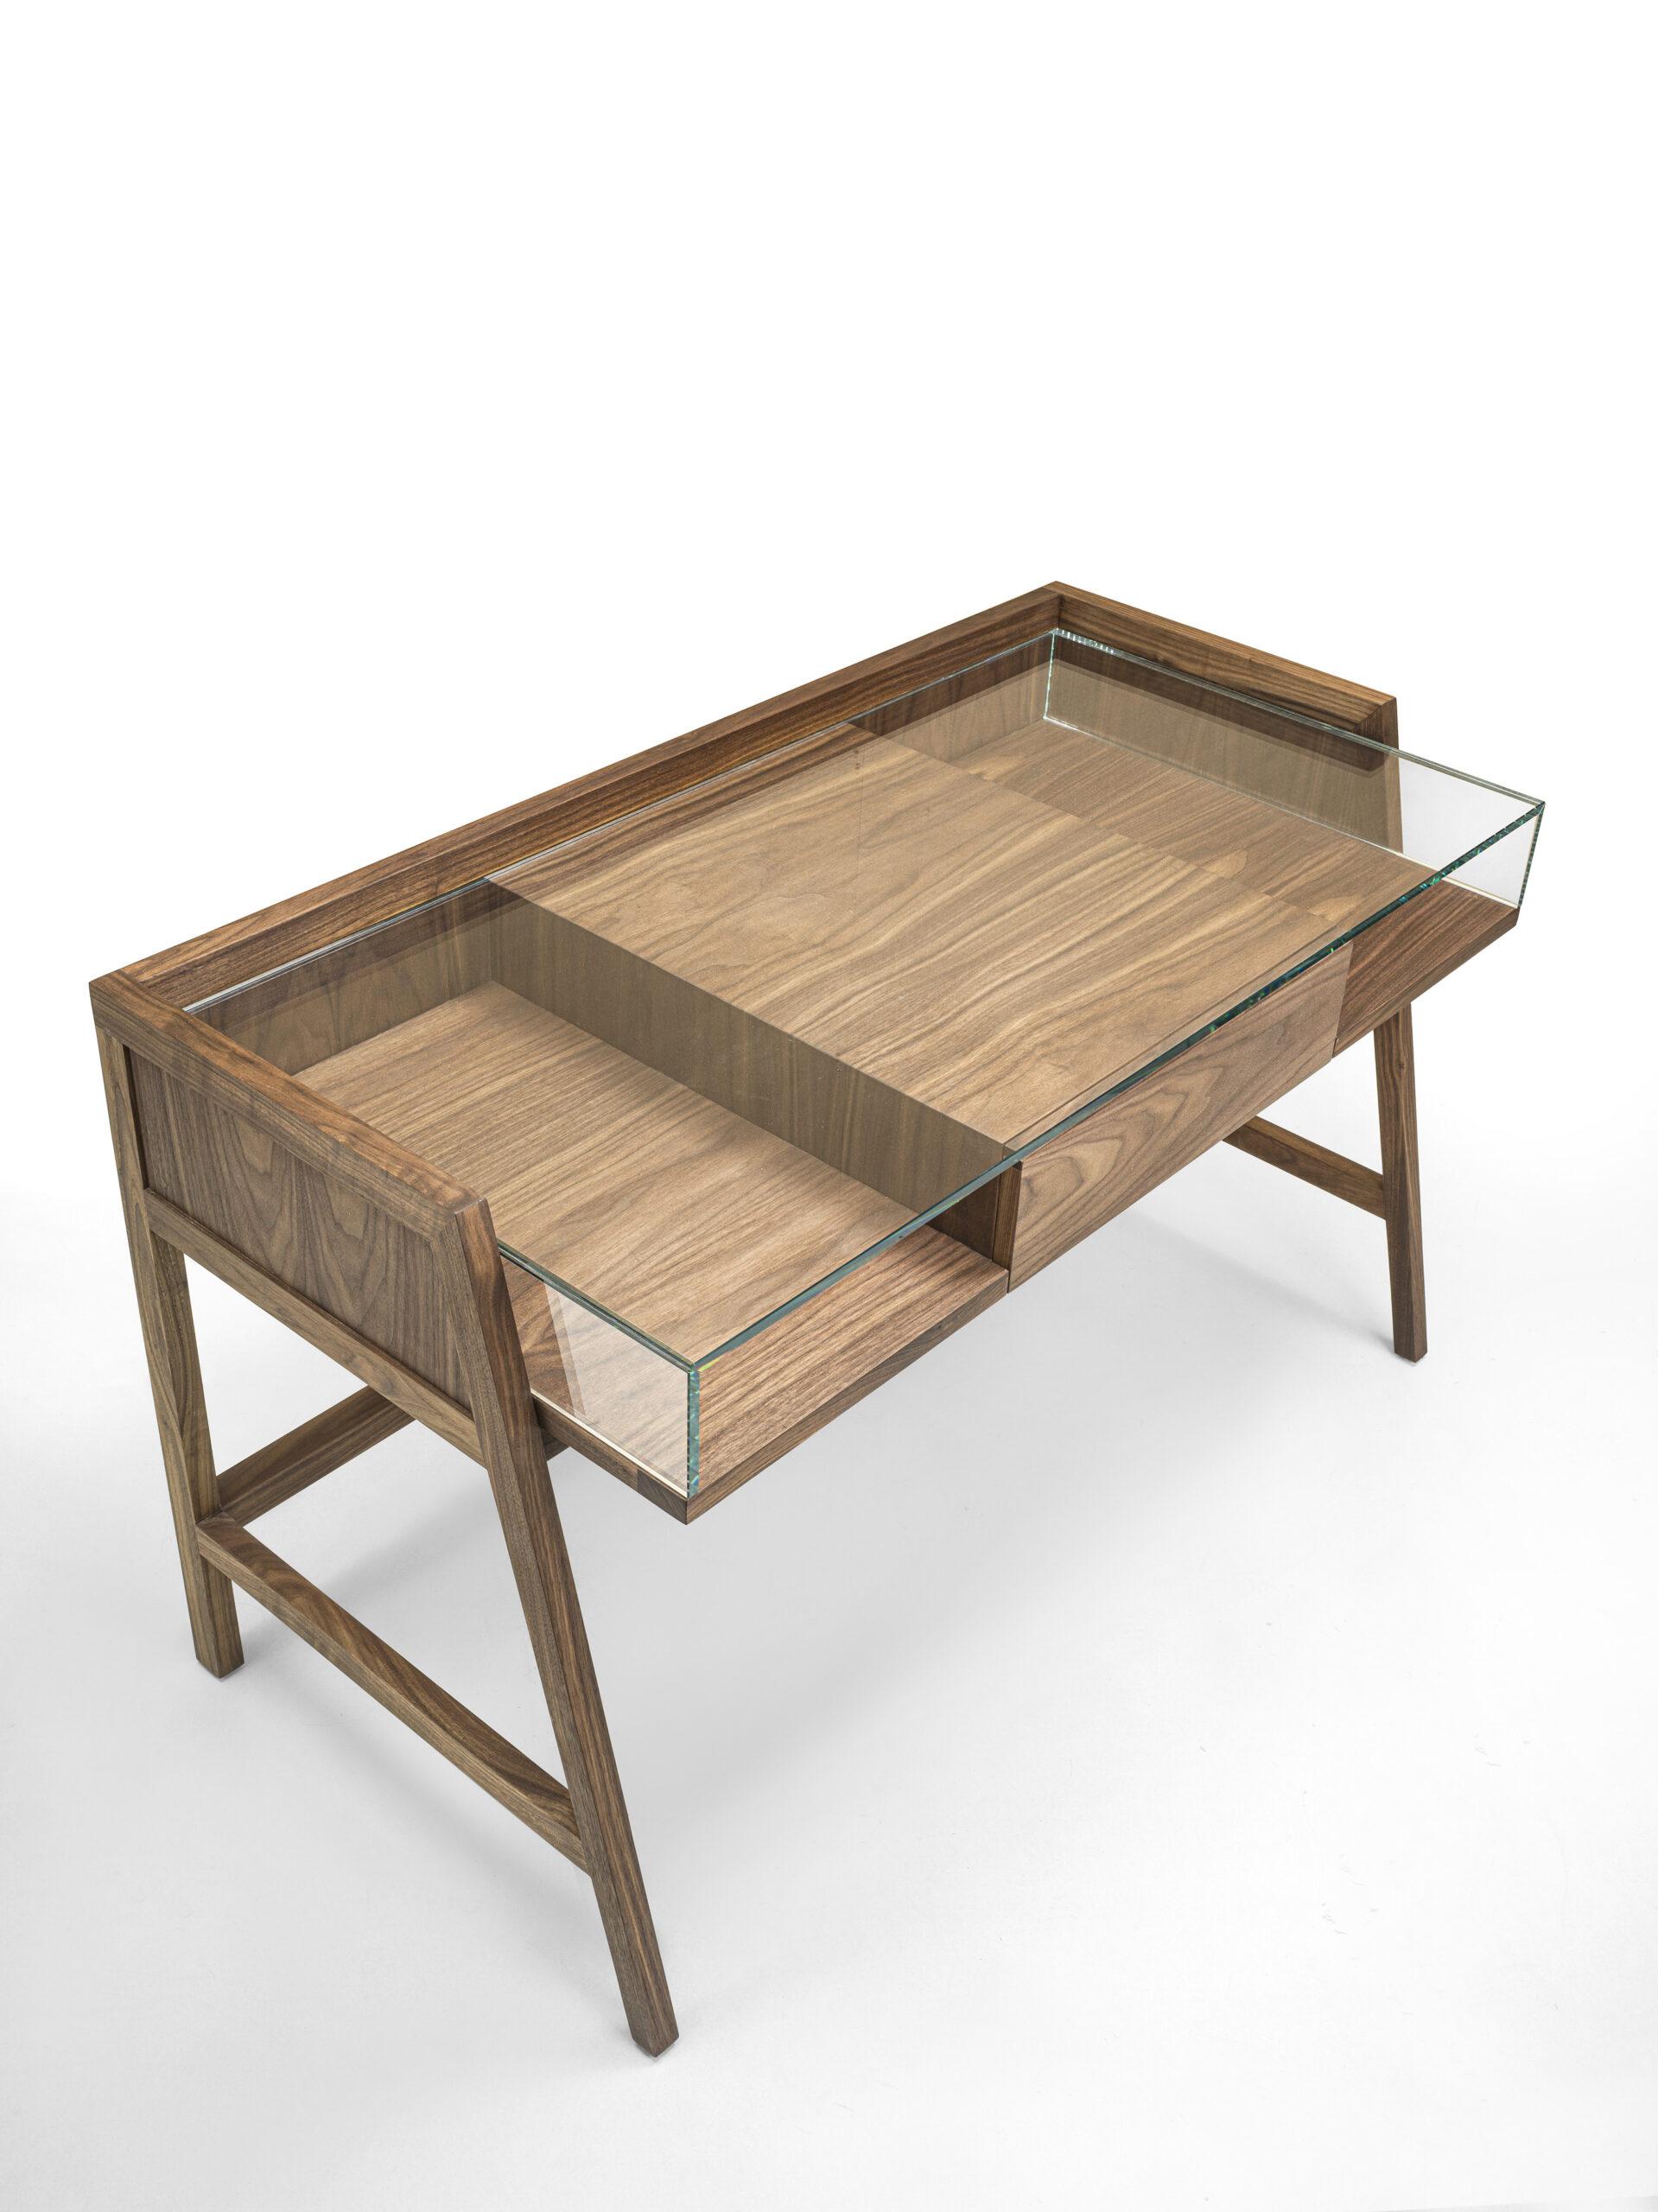 Italian Wood and Glass Writing Desk, Designed by Giovanna Azzarello, Made in Italy For Sale